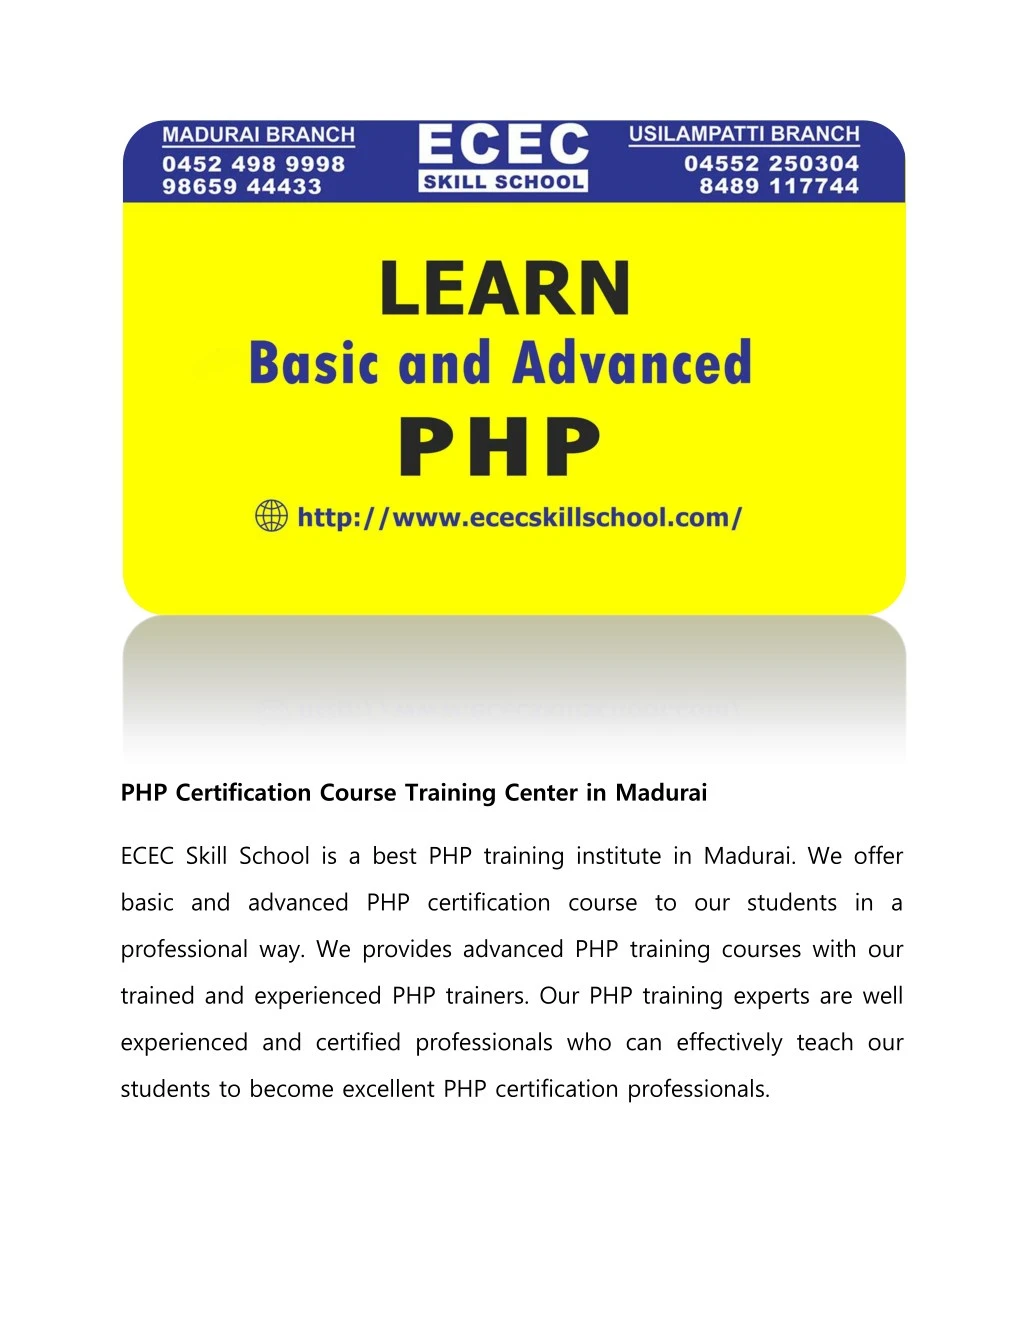 php certification course training center